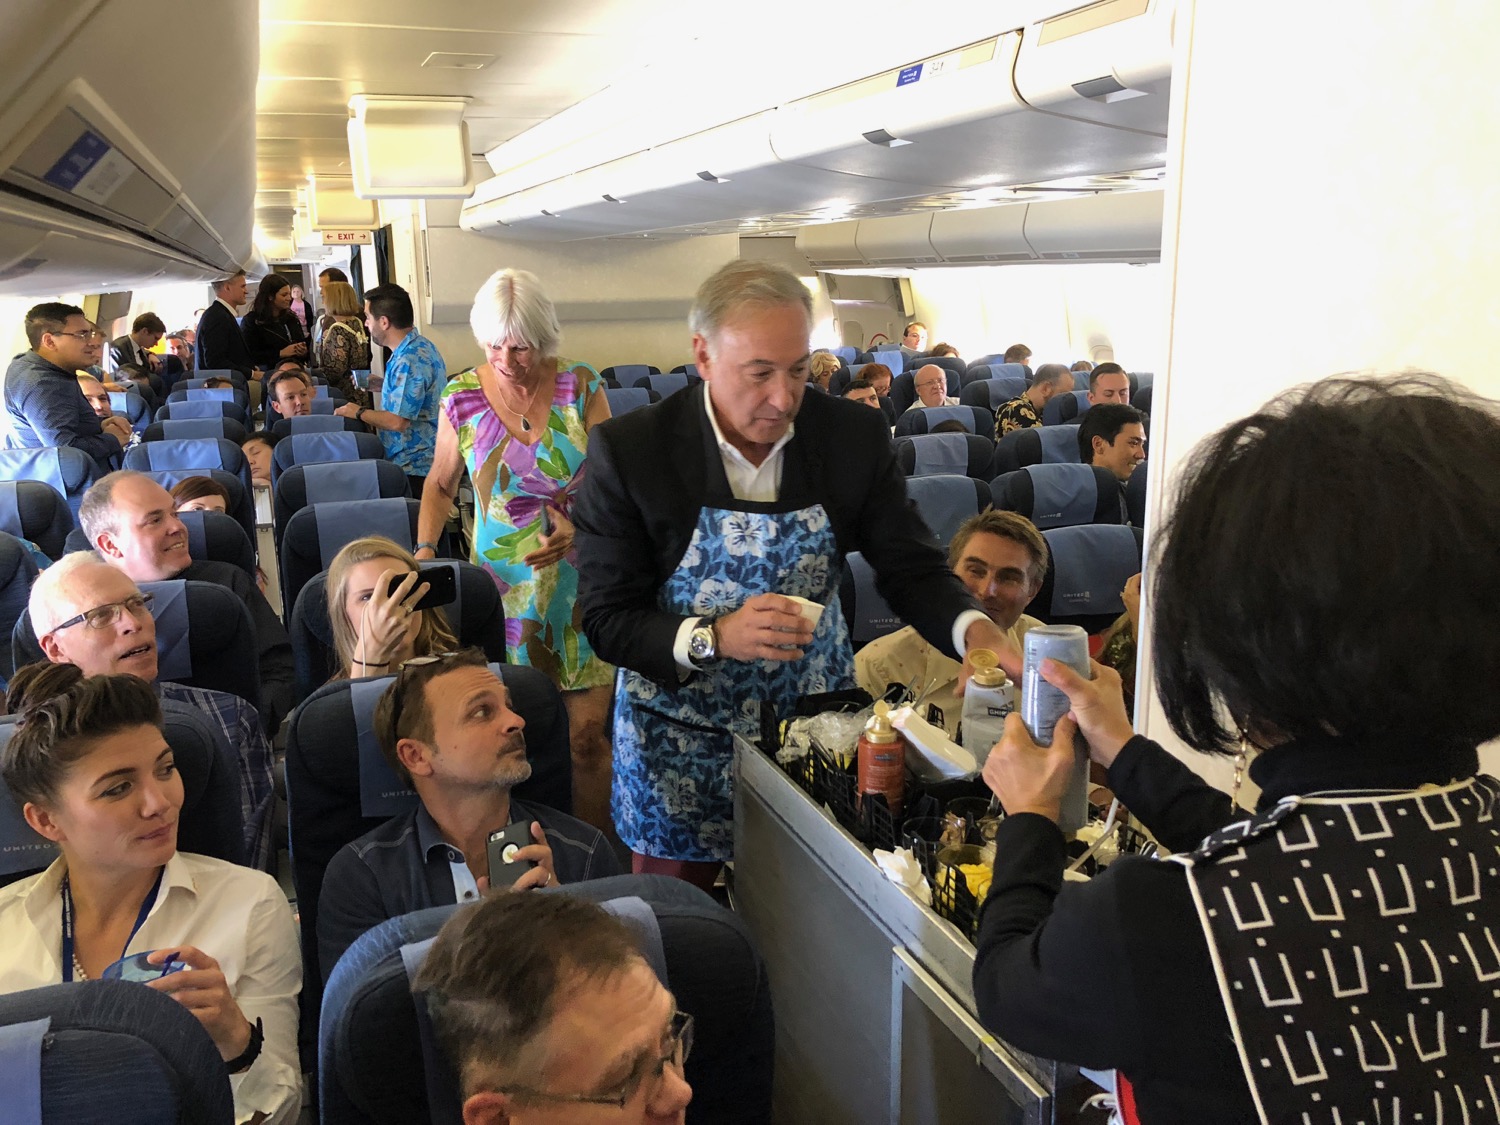 a man standing in an airplane with people around him